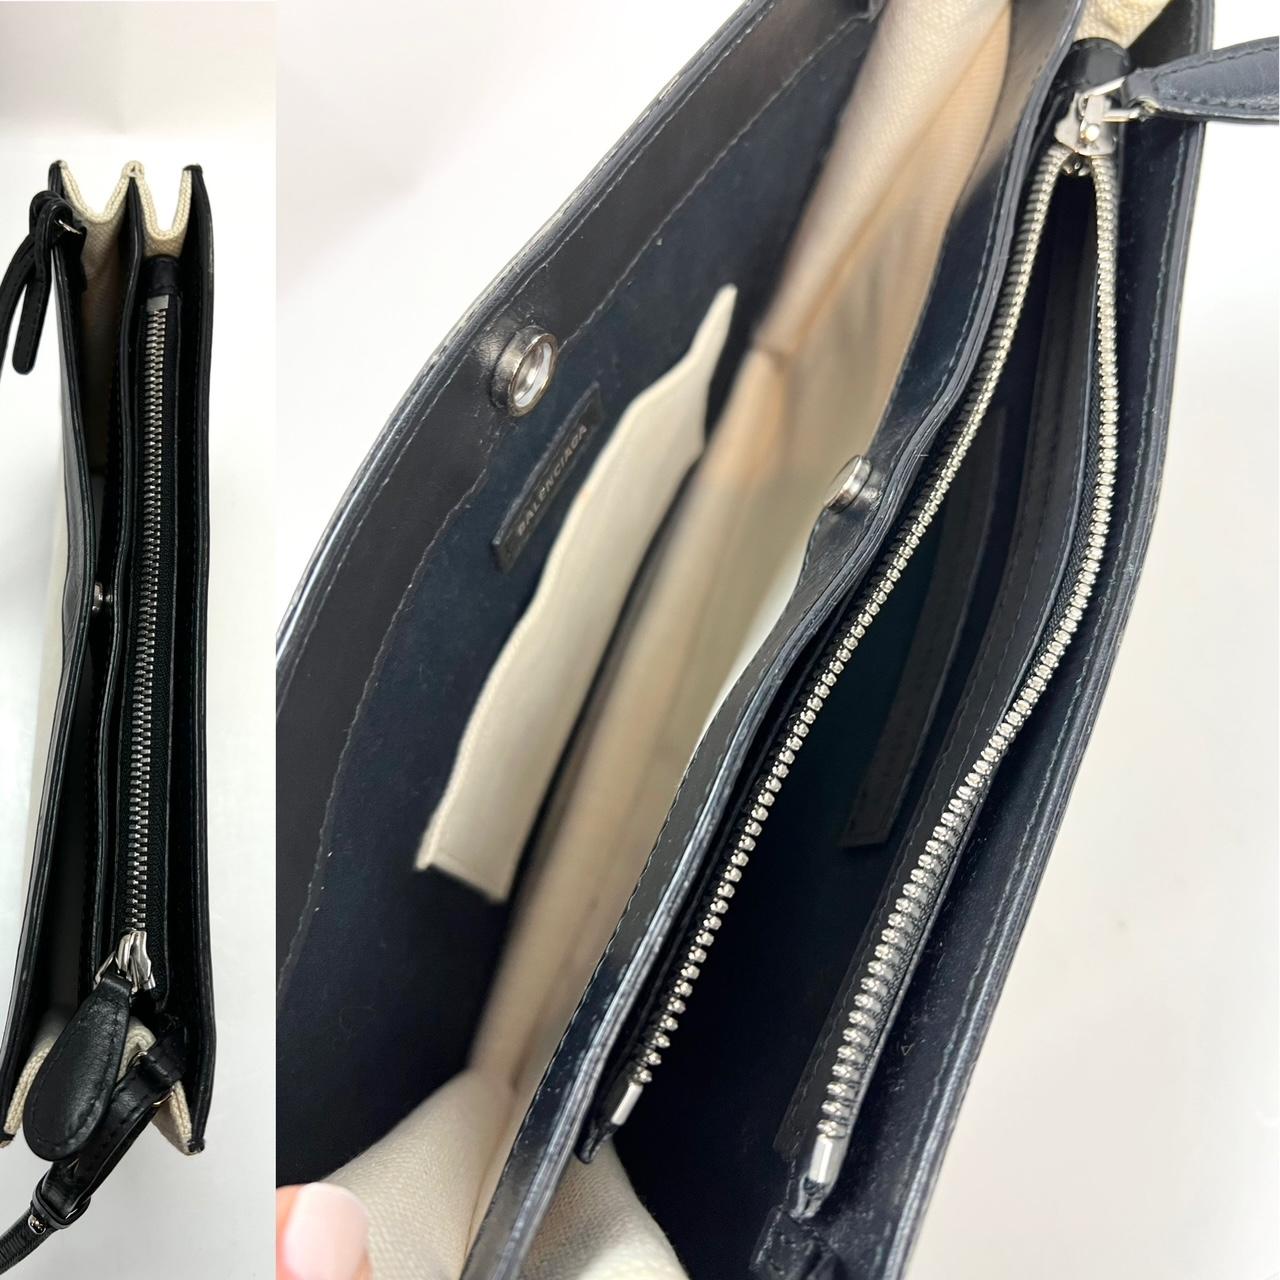 Pre-Owned  100% Authentic
Balenciaga Cotton Canvas Pochette Off White Crossbody
Black Leather Trim
RATING: B...Very Good, well maintained, 
shows minor signs of wear
MEASUREMENTS: H 7.5'' x L 10.1'' x W 2''
HARDWARE: silver
HANDLE DROP: adjustable